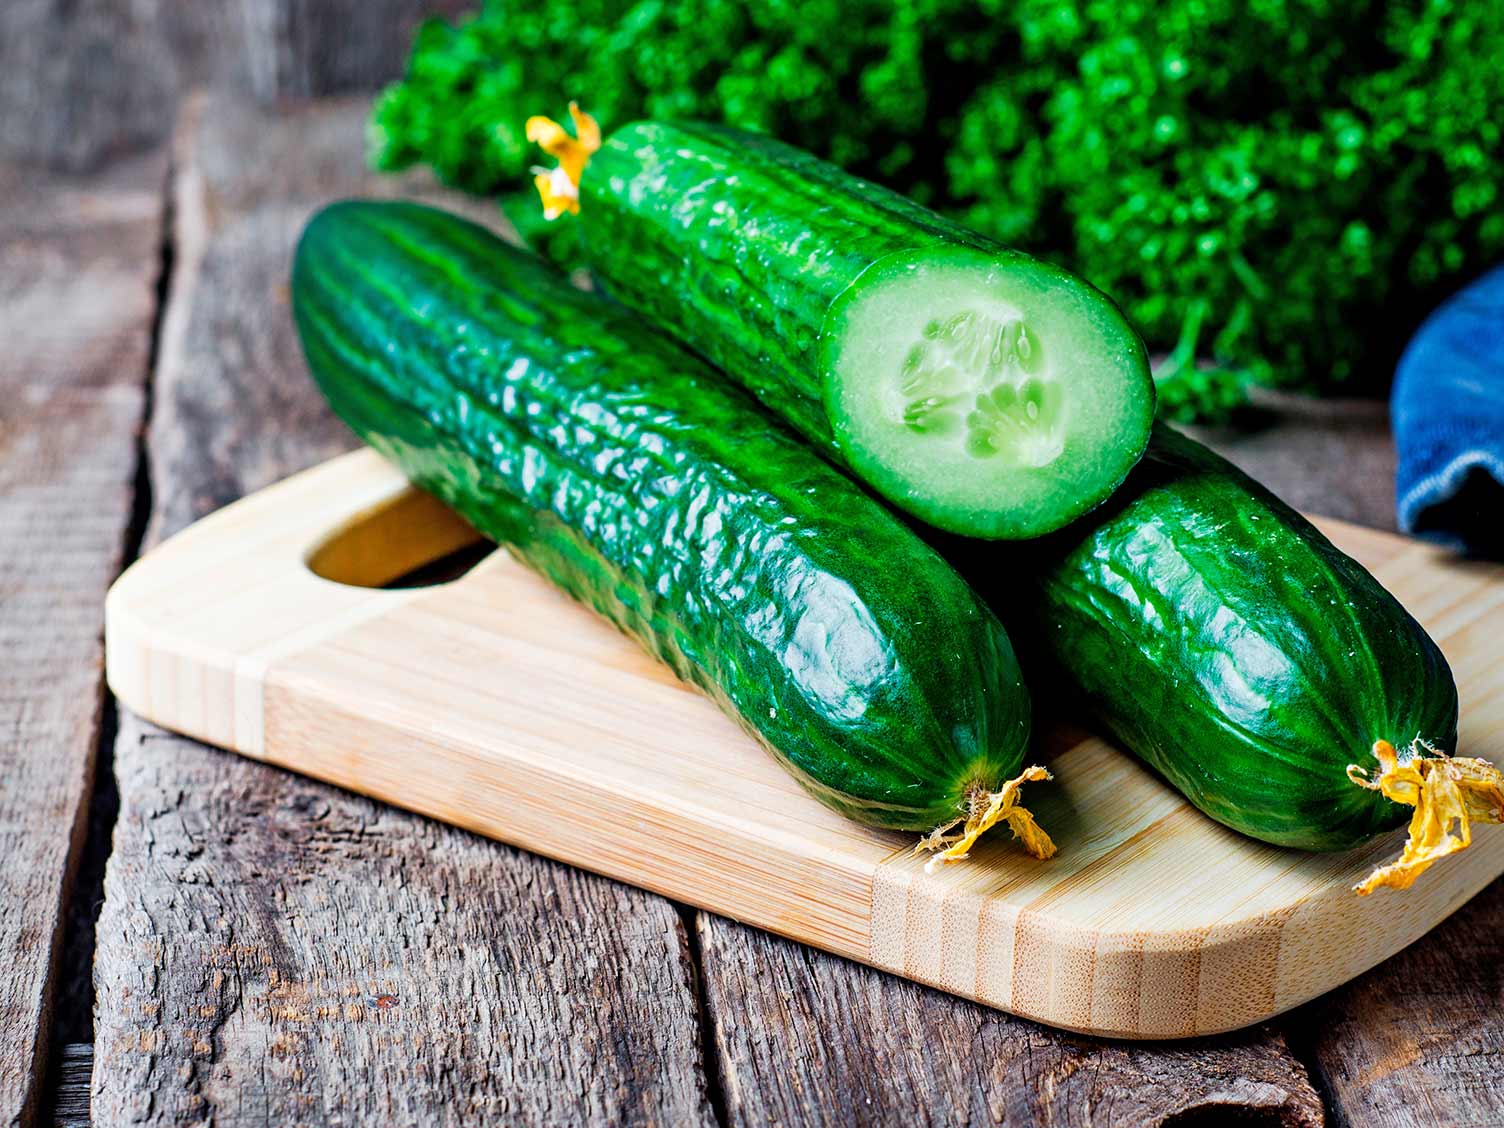 How to grow and care for cucumbers | lovethegarden